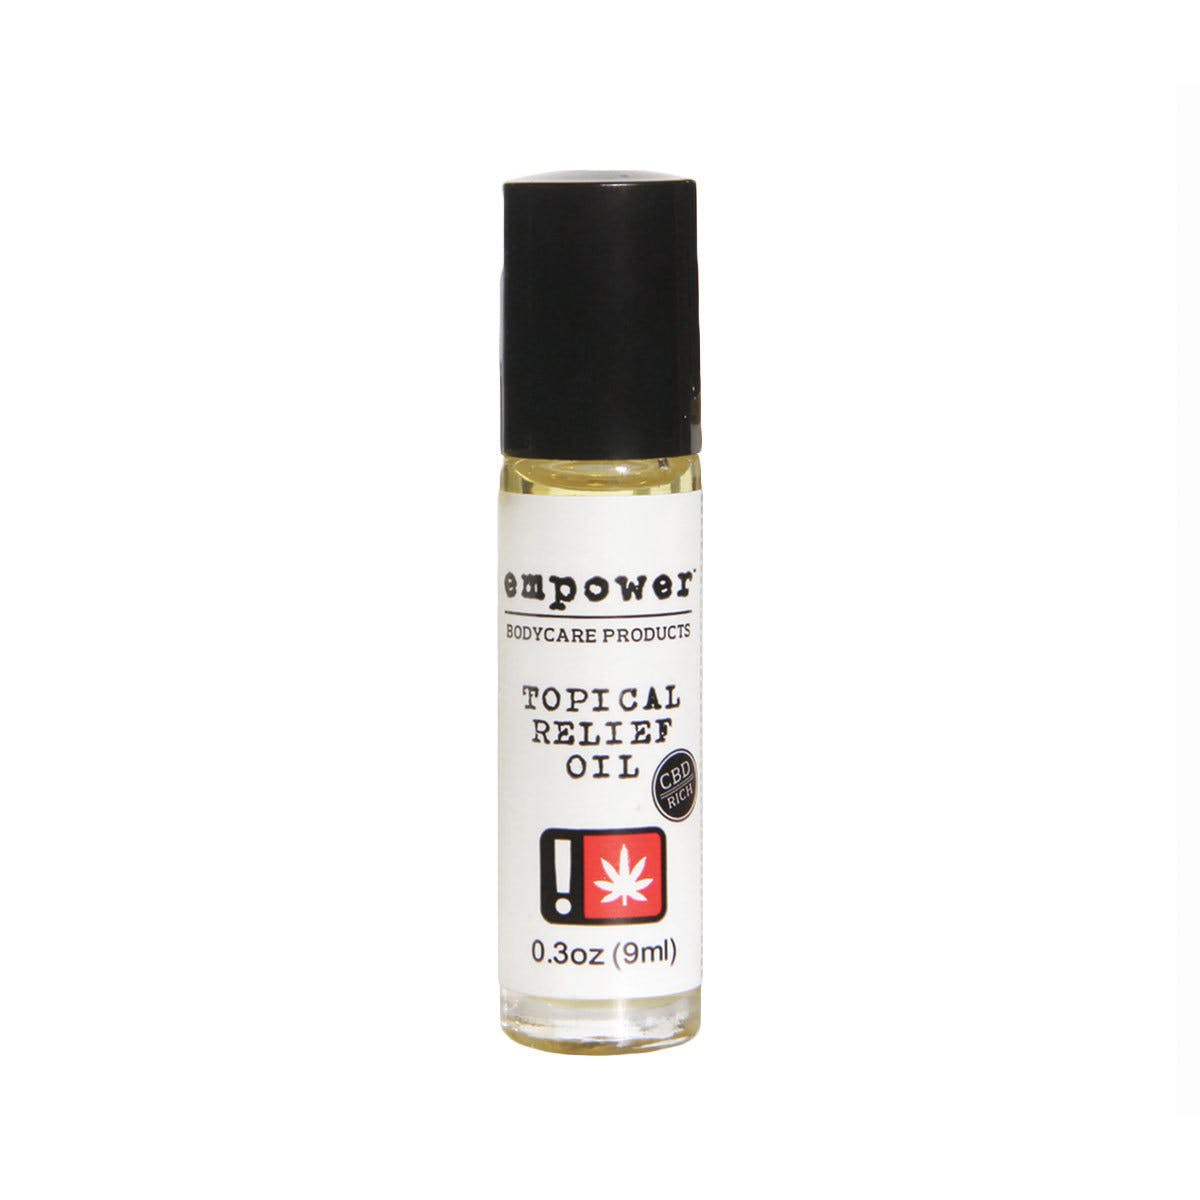 Empower® Topical Relief Oil - White Label 9ml